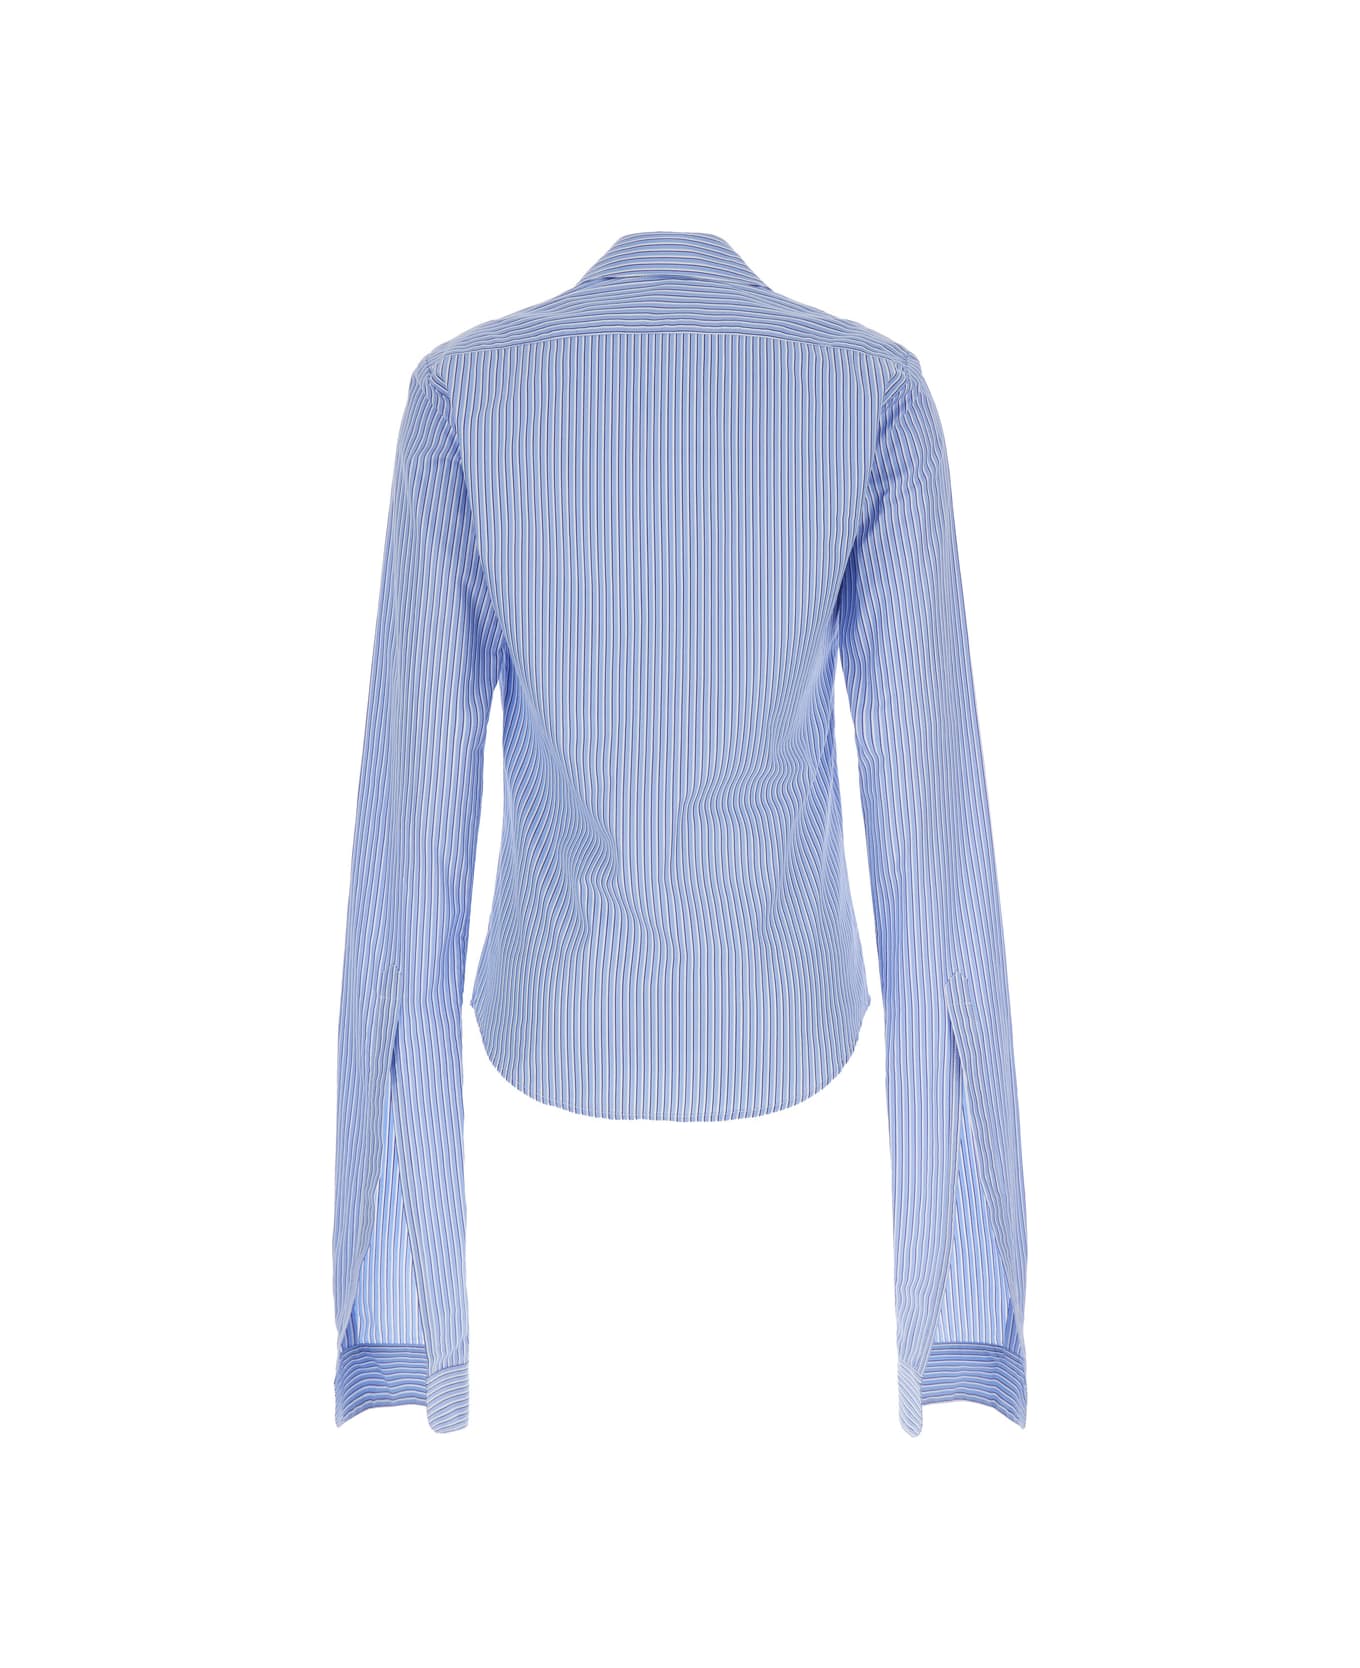 Coperni White And Light Blue Shirt With Knotted Cuffs In Cotton Woman - Light blue